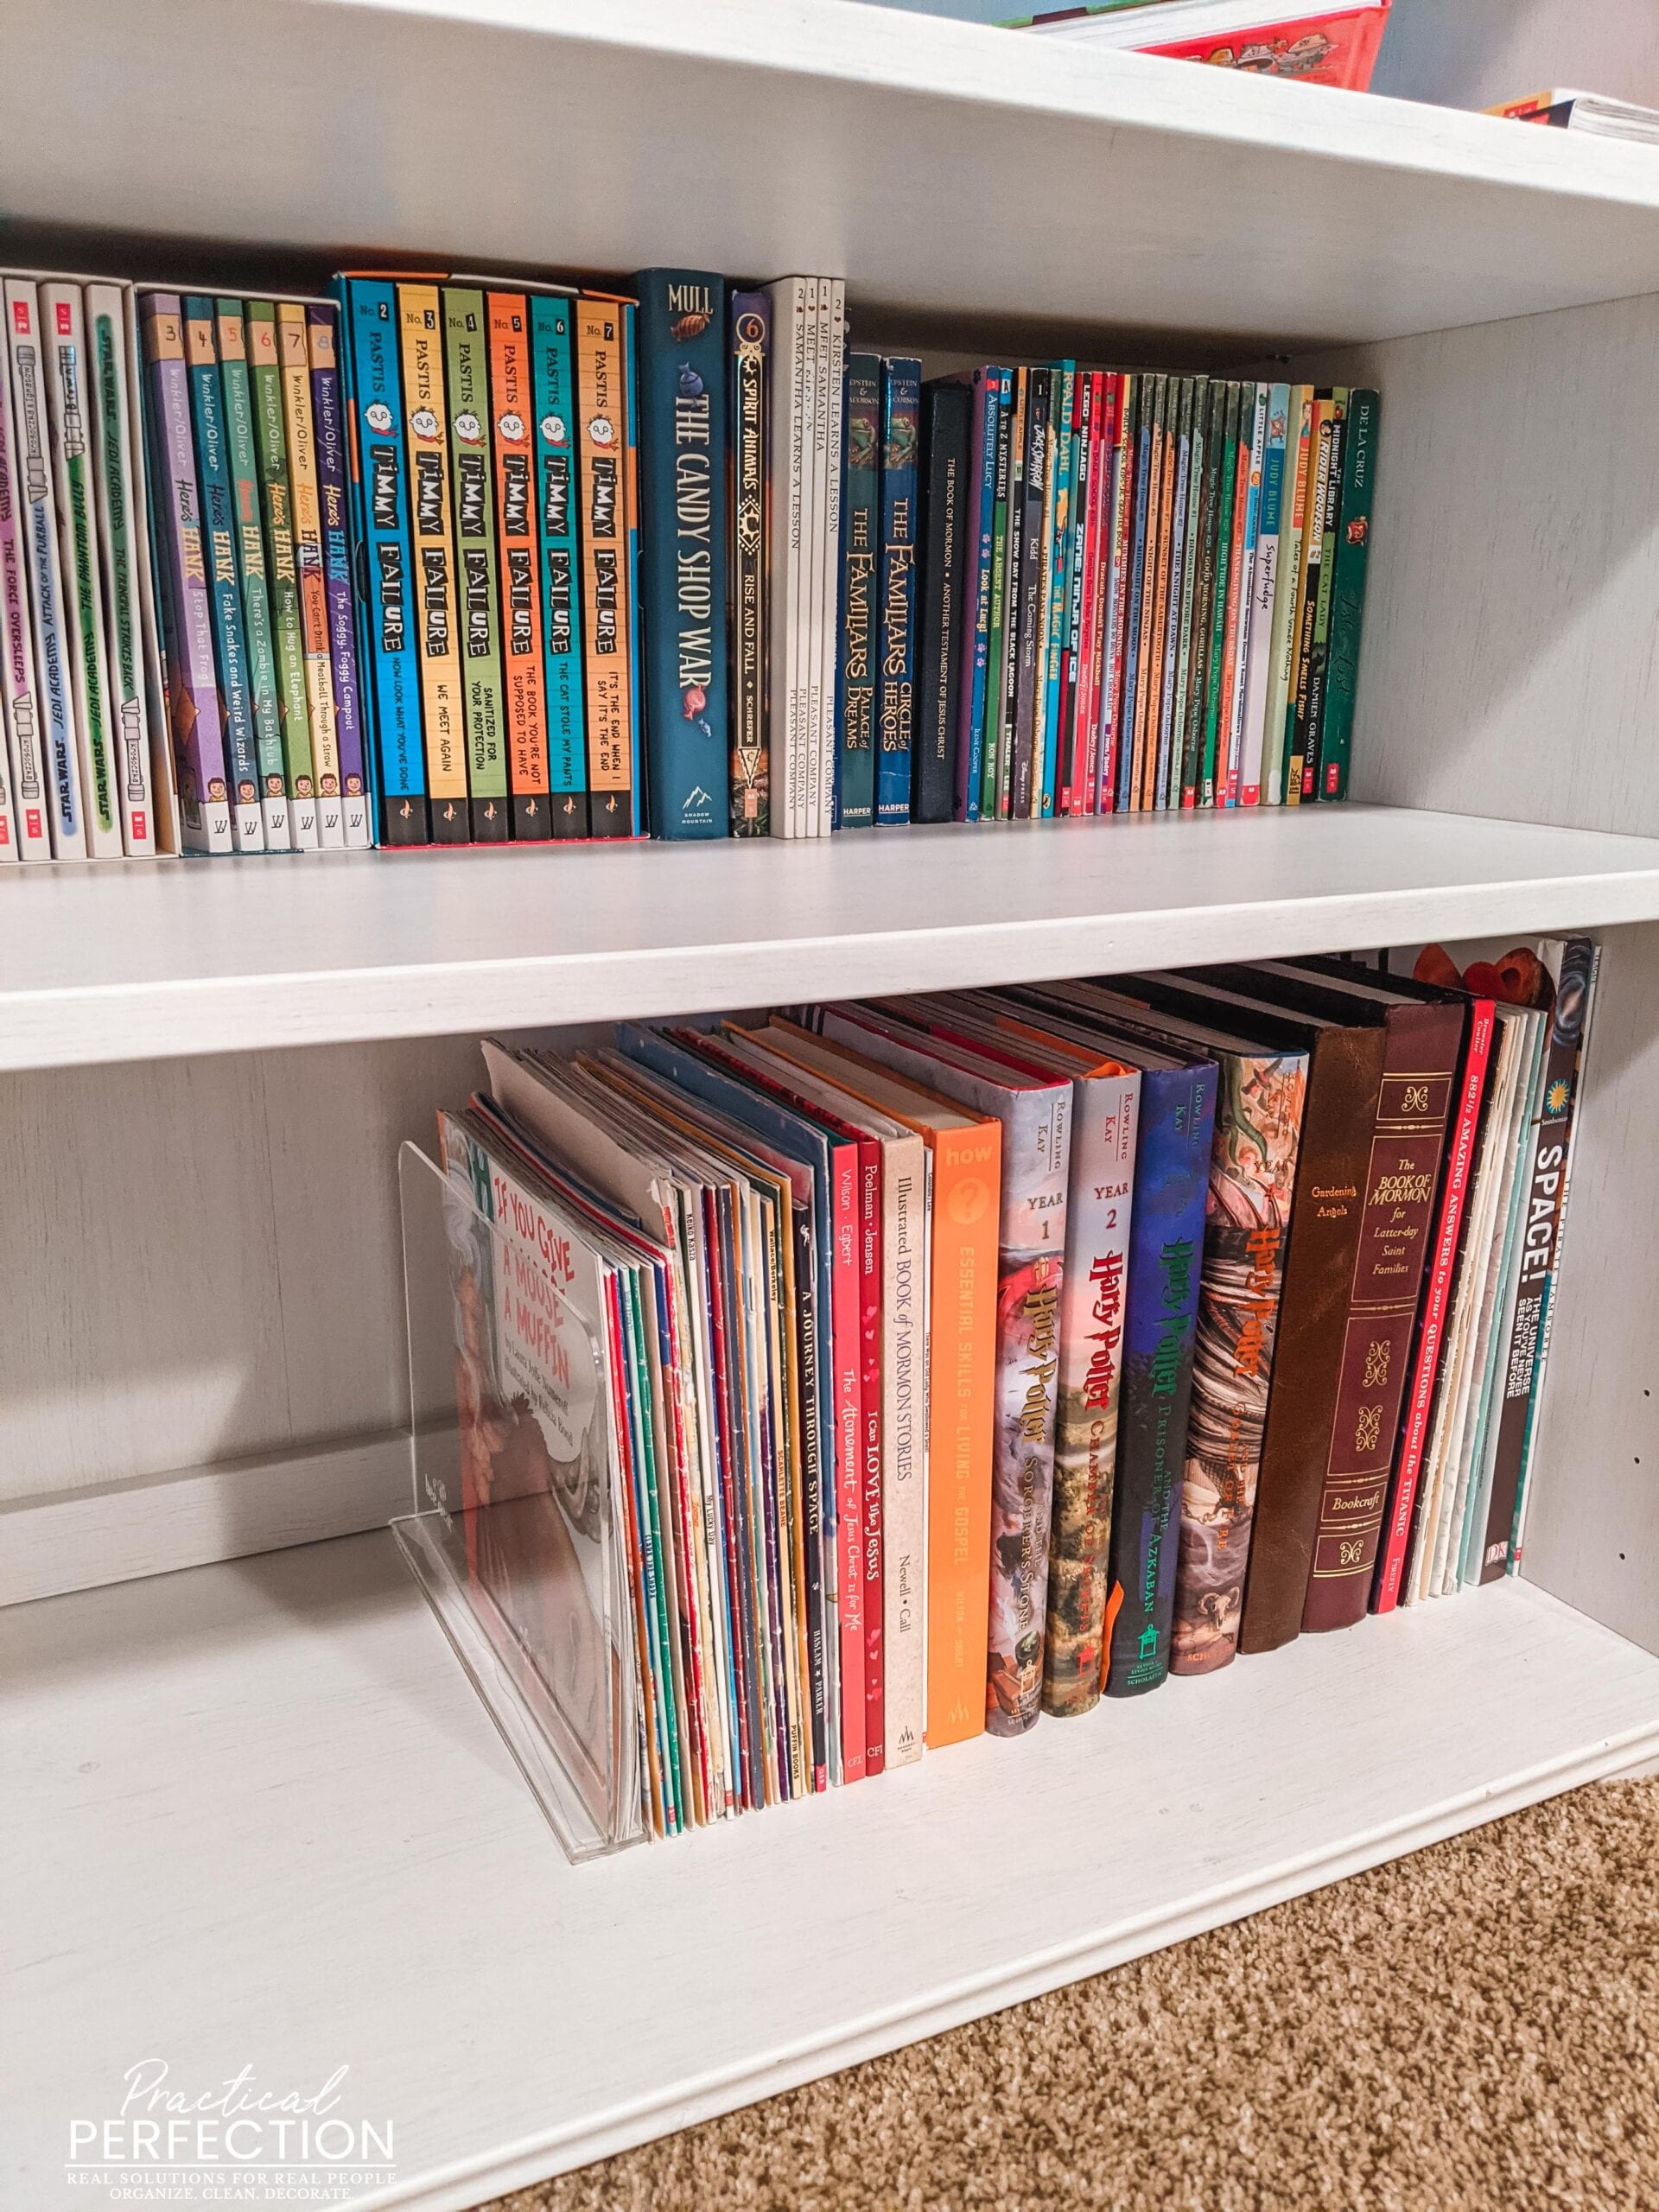 12 Awesome Ways You Can Use Acrylic Shelf Dividers to Organize Your Home